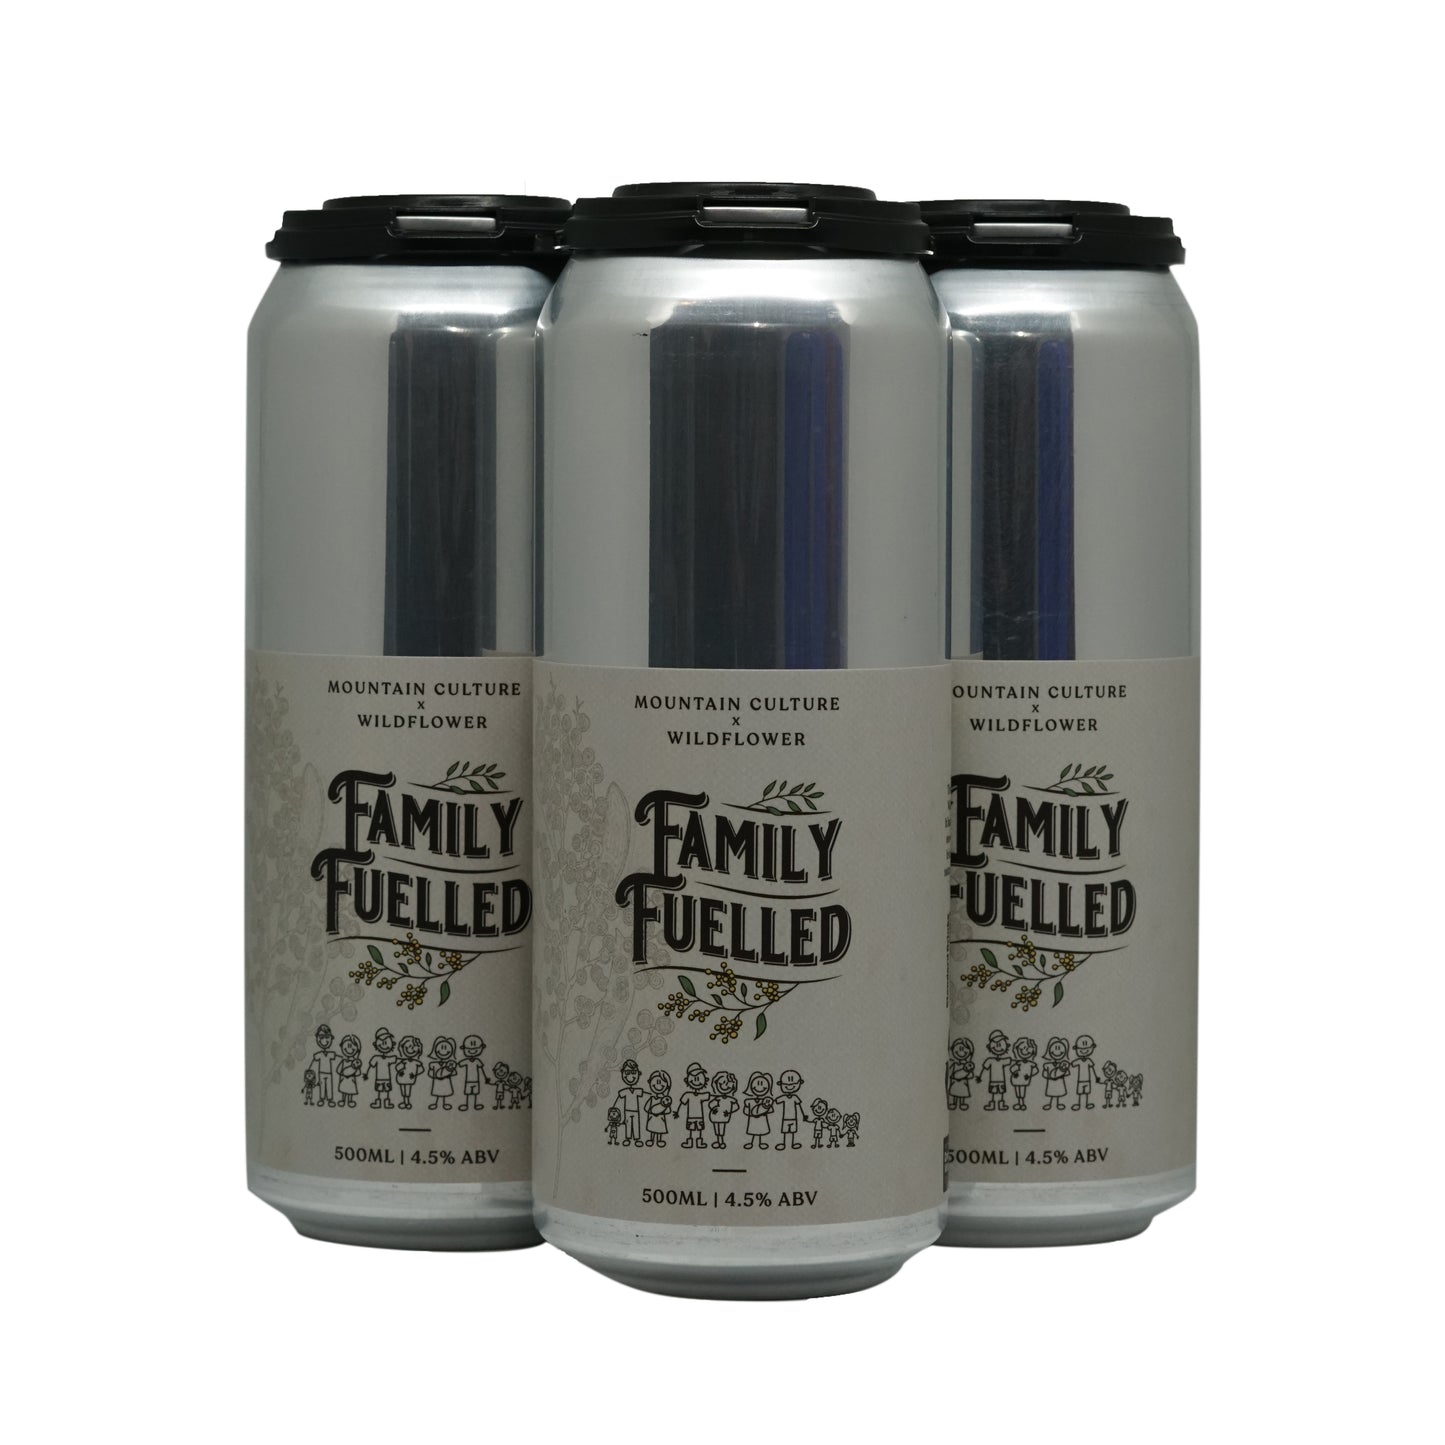 Mountain Culture x Wildflower - Family Fuelled - 4 x 500ml cans